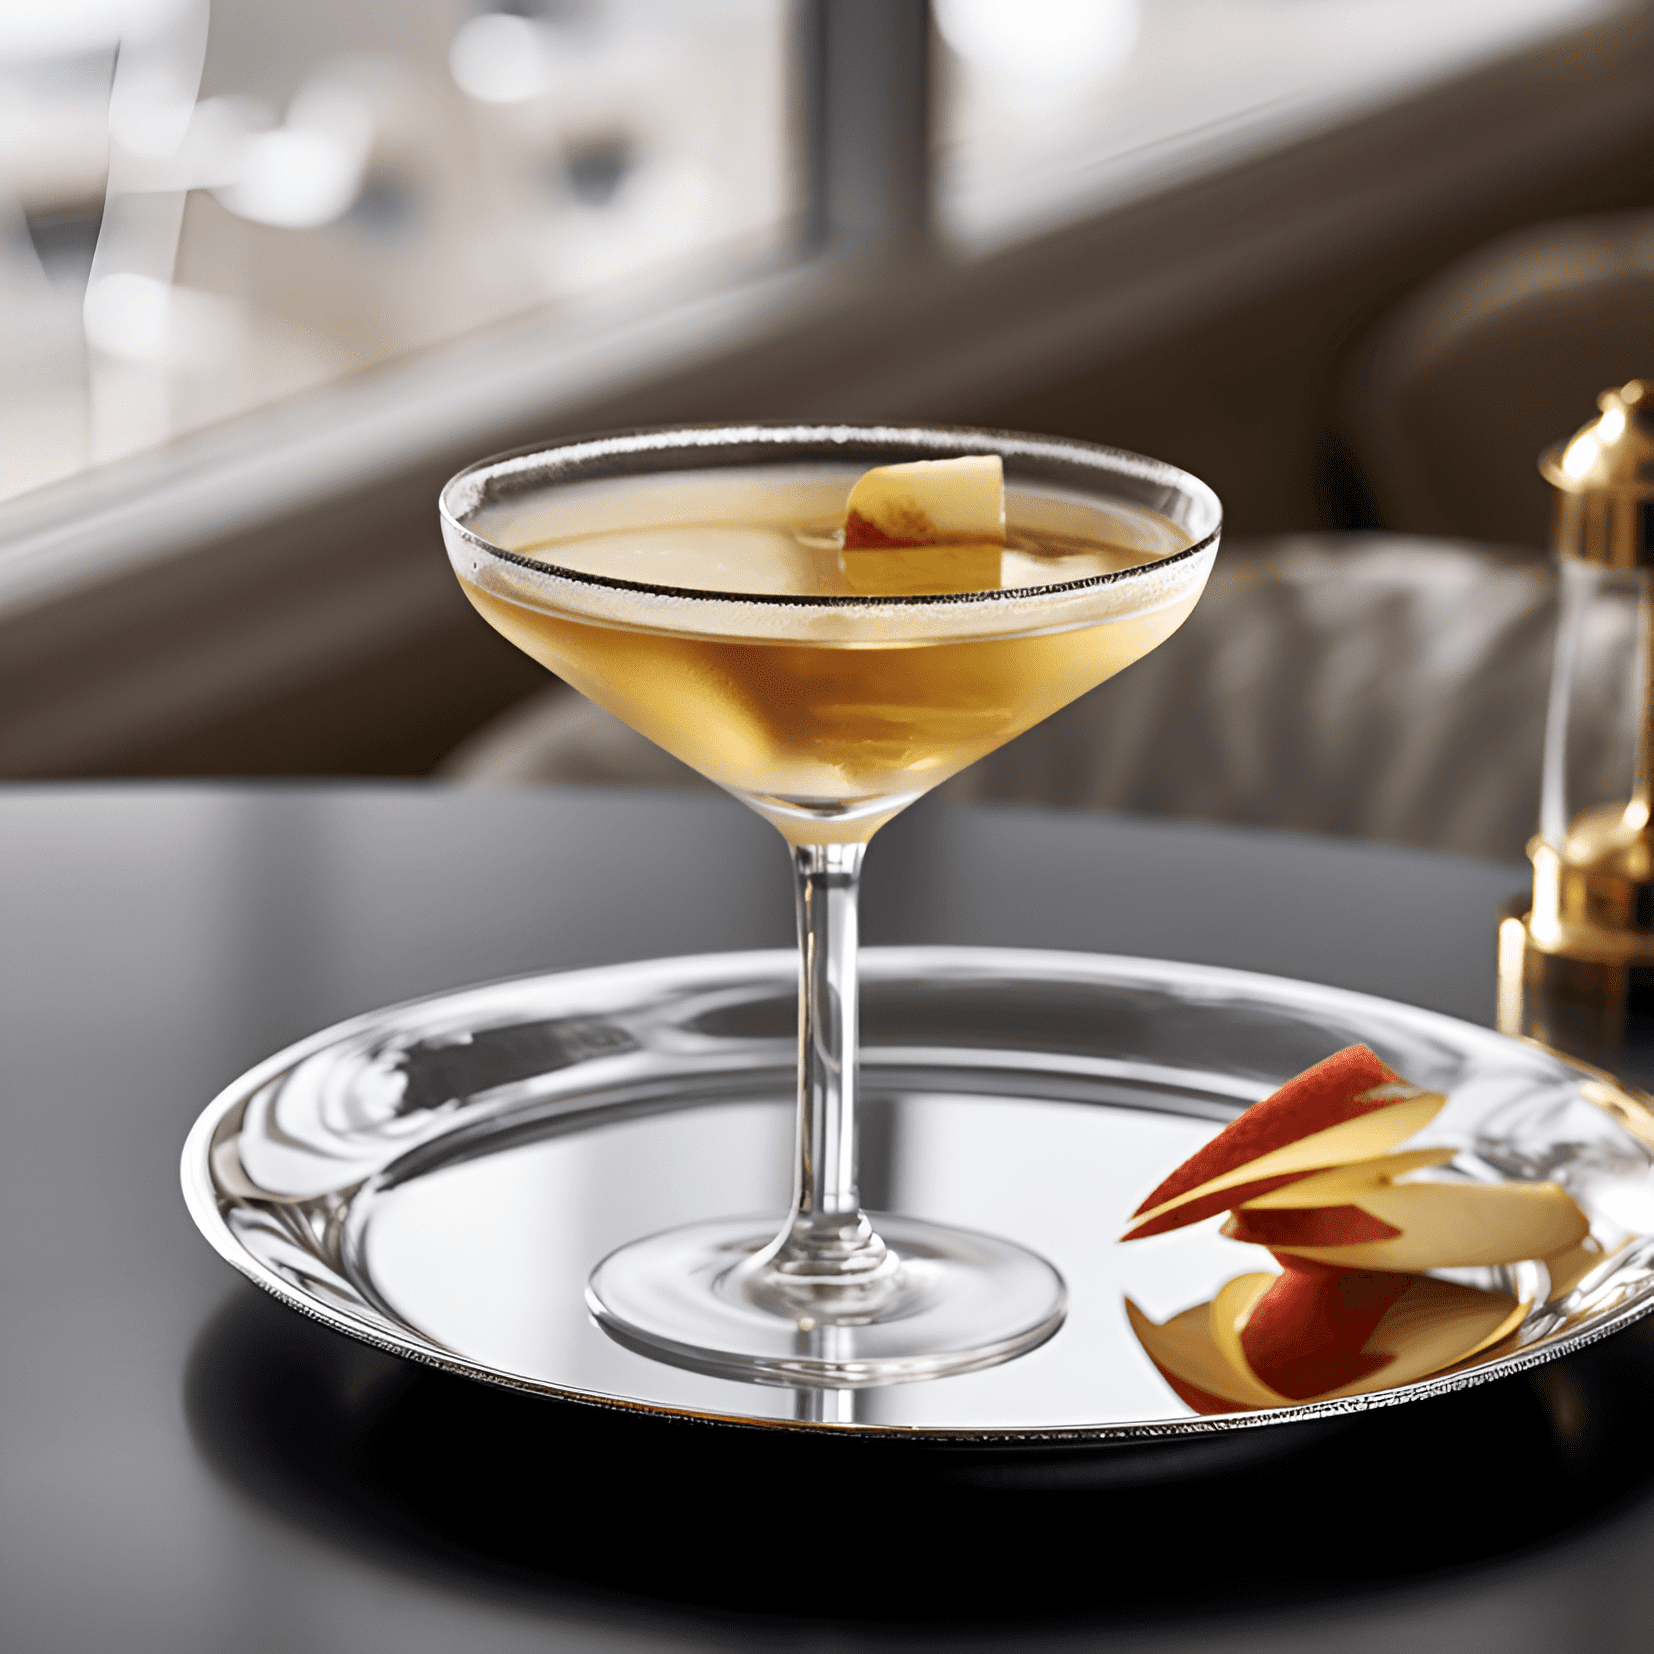 Applecar Cocktail Recipe - The Applecar cocktail is a delightful combination of sweet, sour, and fruity flavors. The apple brandy and lemon juice provide a tangy and refreshing taste, while the triple sec adds a hint of sweetness. The cocktail is well-balanced, with a smooth and slightly strong finish.